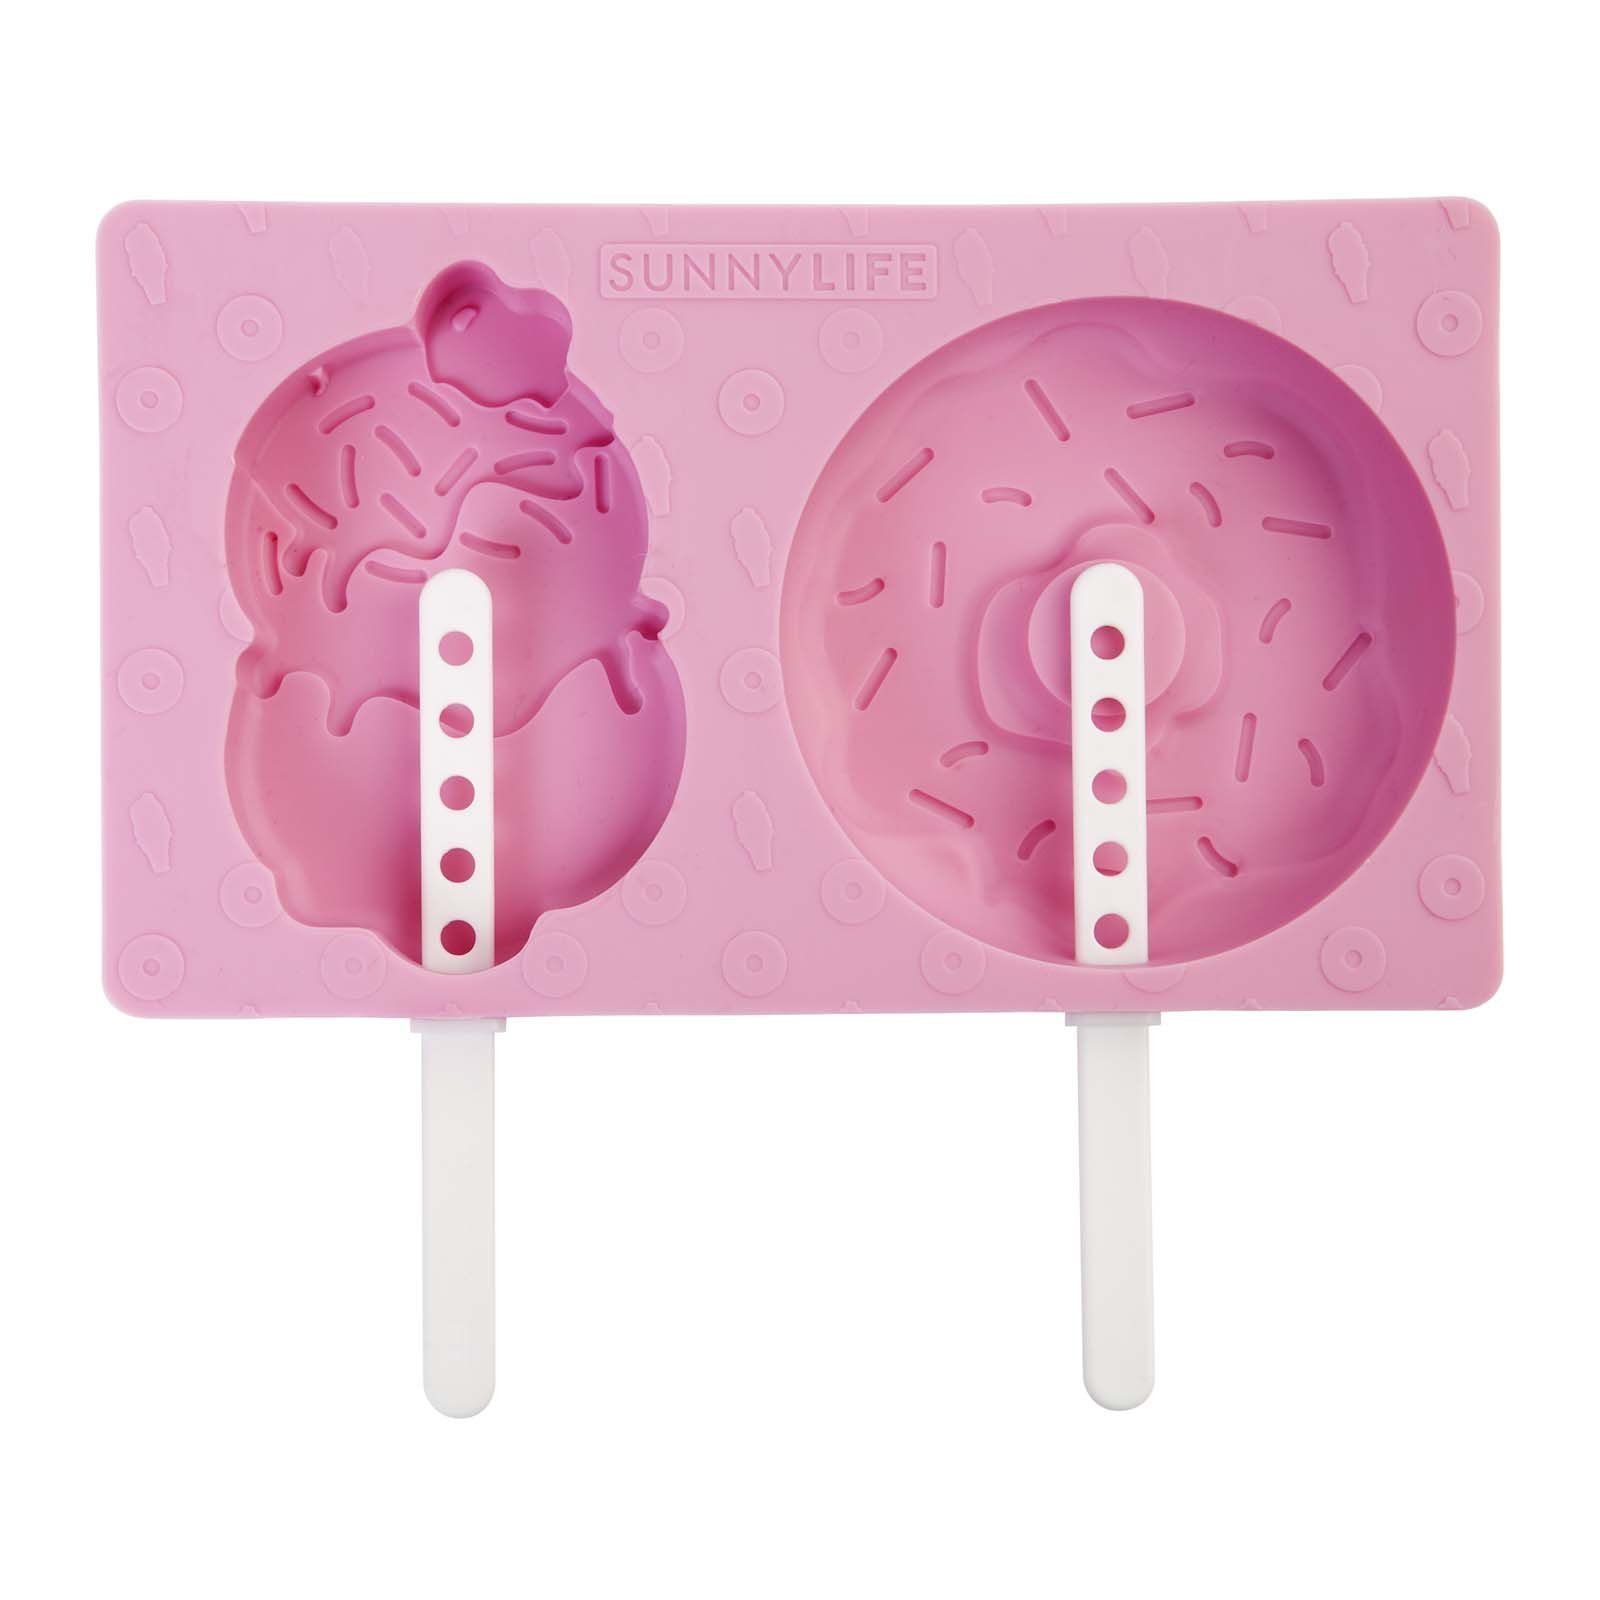 Dream of summer with these BPA free ice pop molds, $20 @sunnylife.com